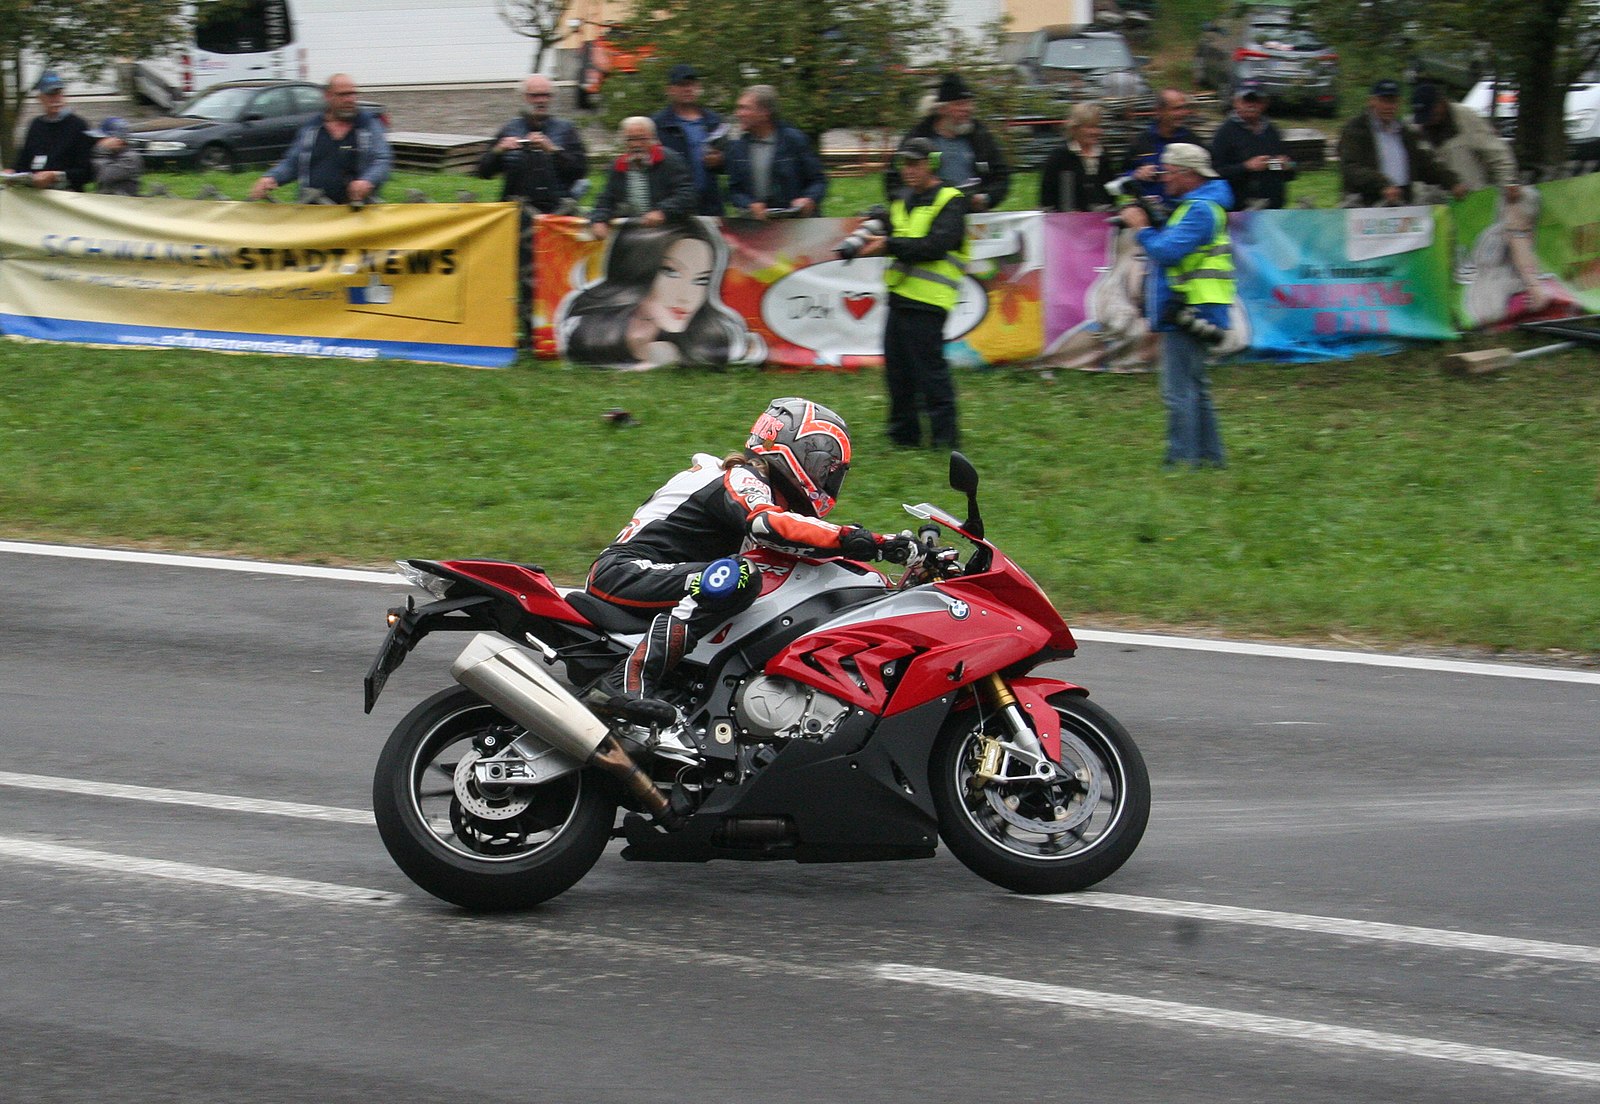 Maria Costello rides a red BMW S 1000RR at the Oldtimer Grand Prix in Austria in 2016